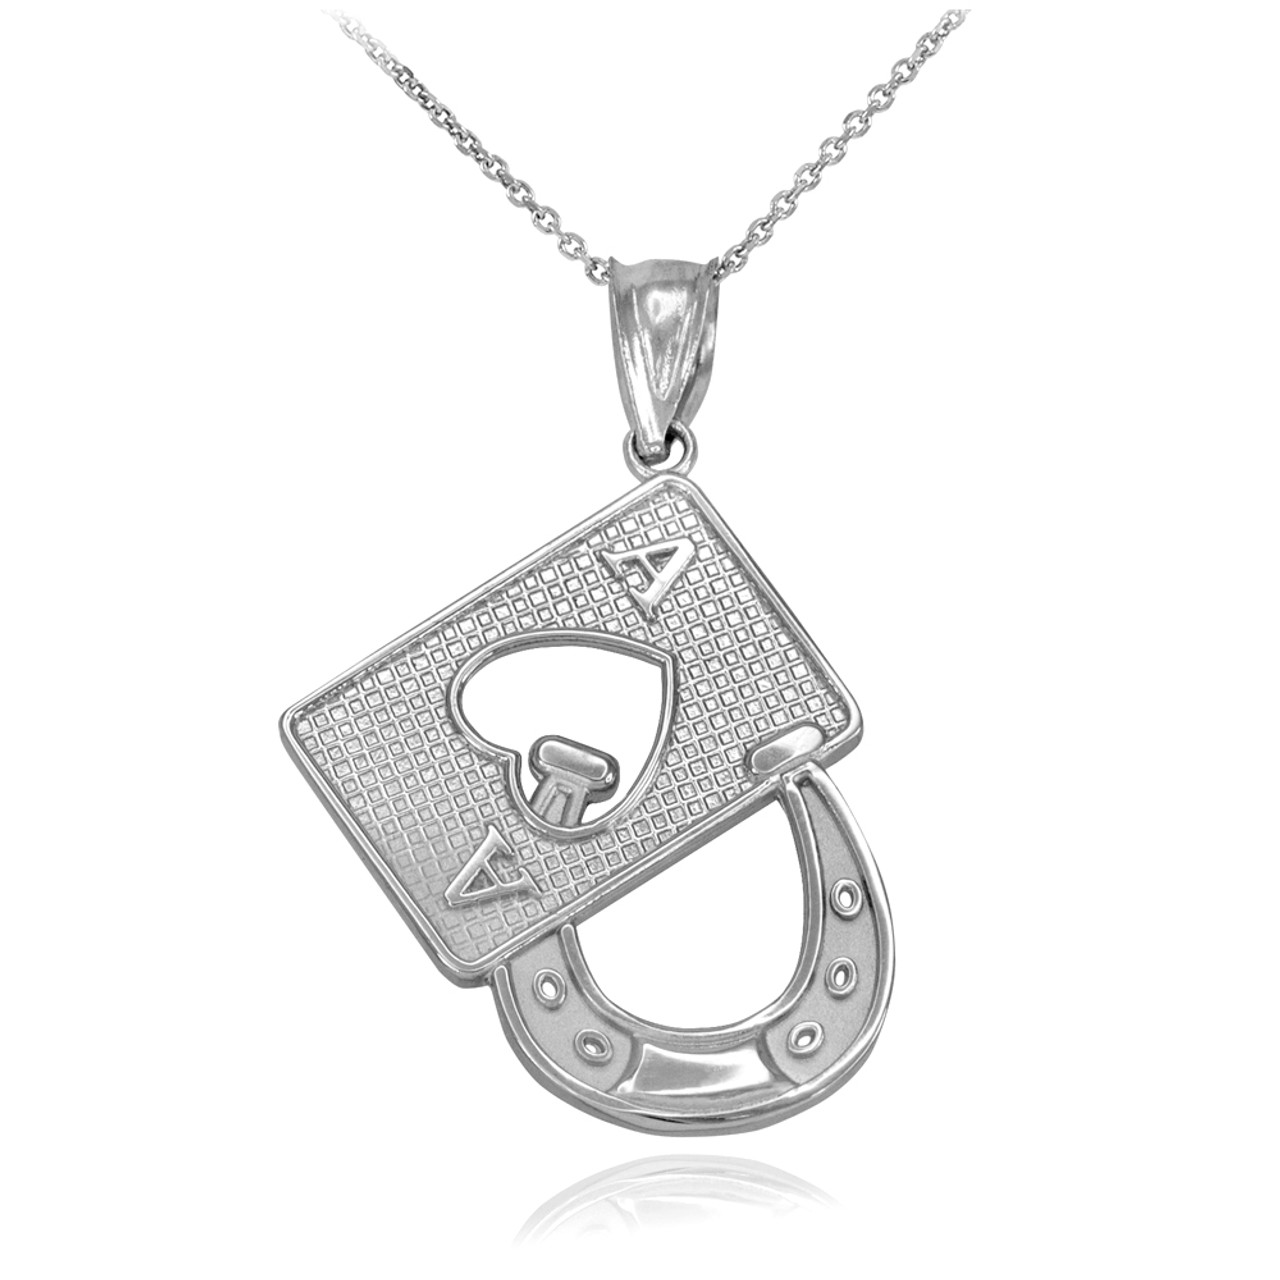  925 Sterling Silver Lucky Horseshoe Pendant Necklace